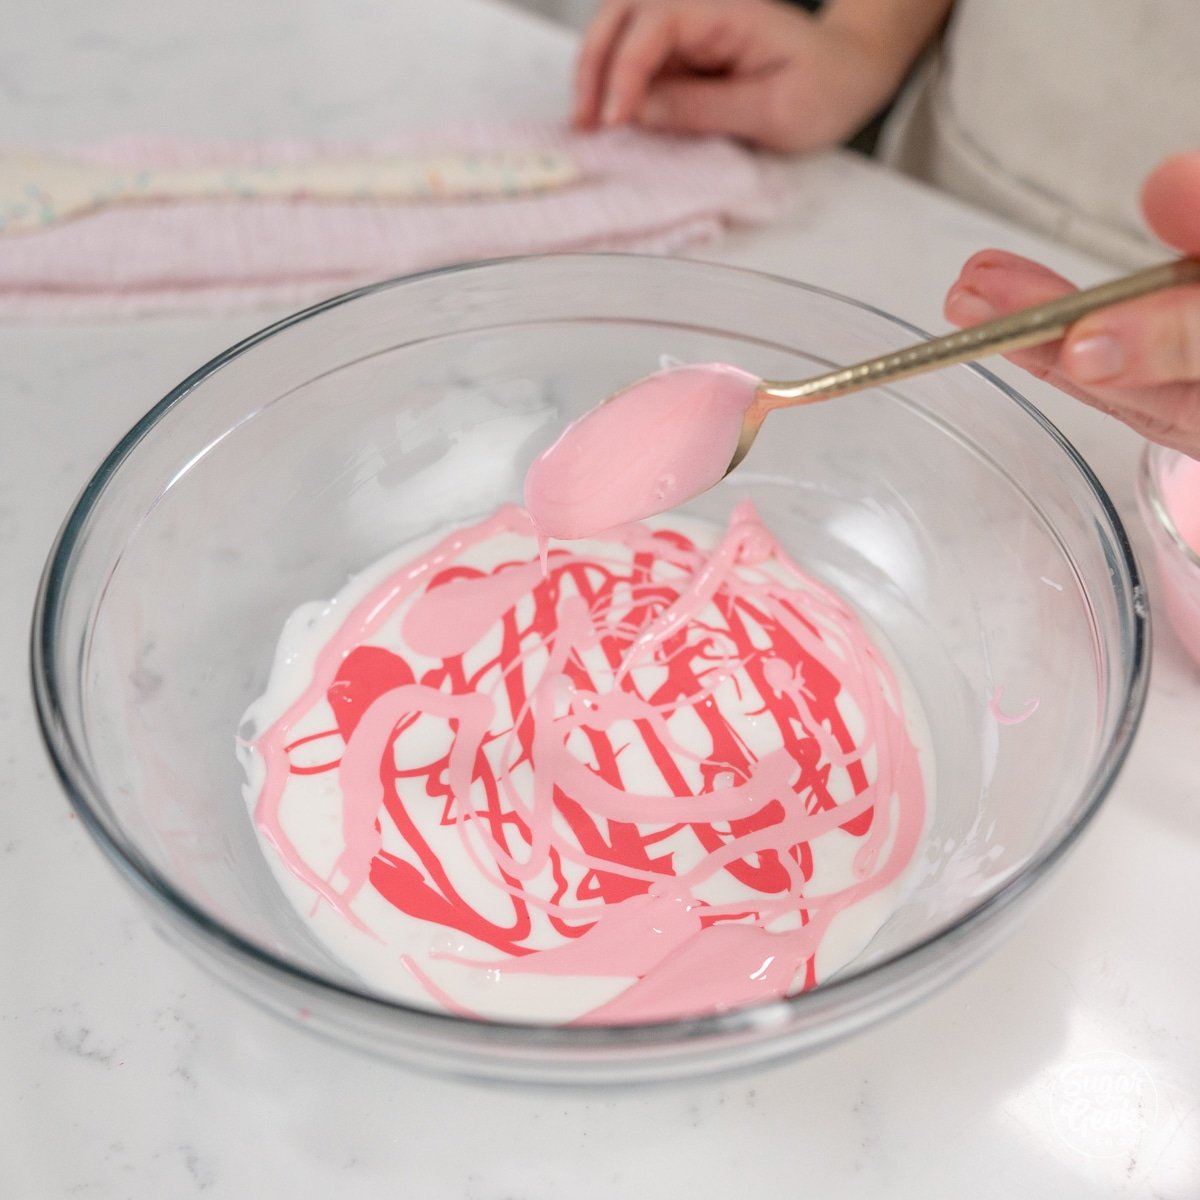 hand using spoon to drizzle colored icing over white icing.